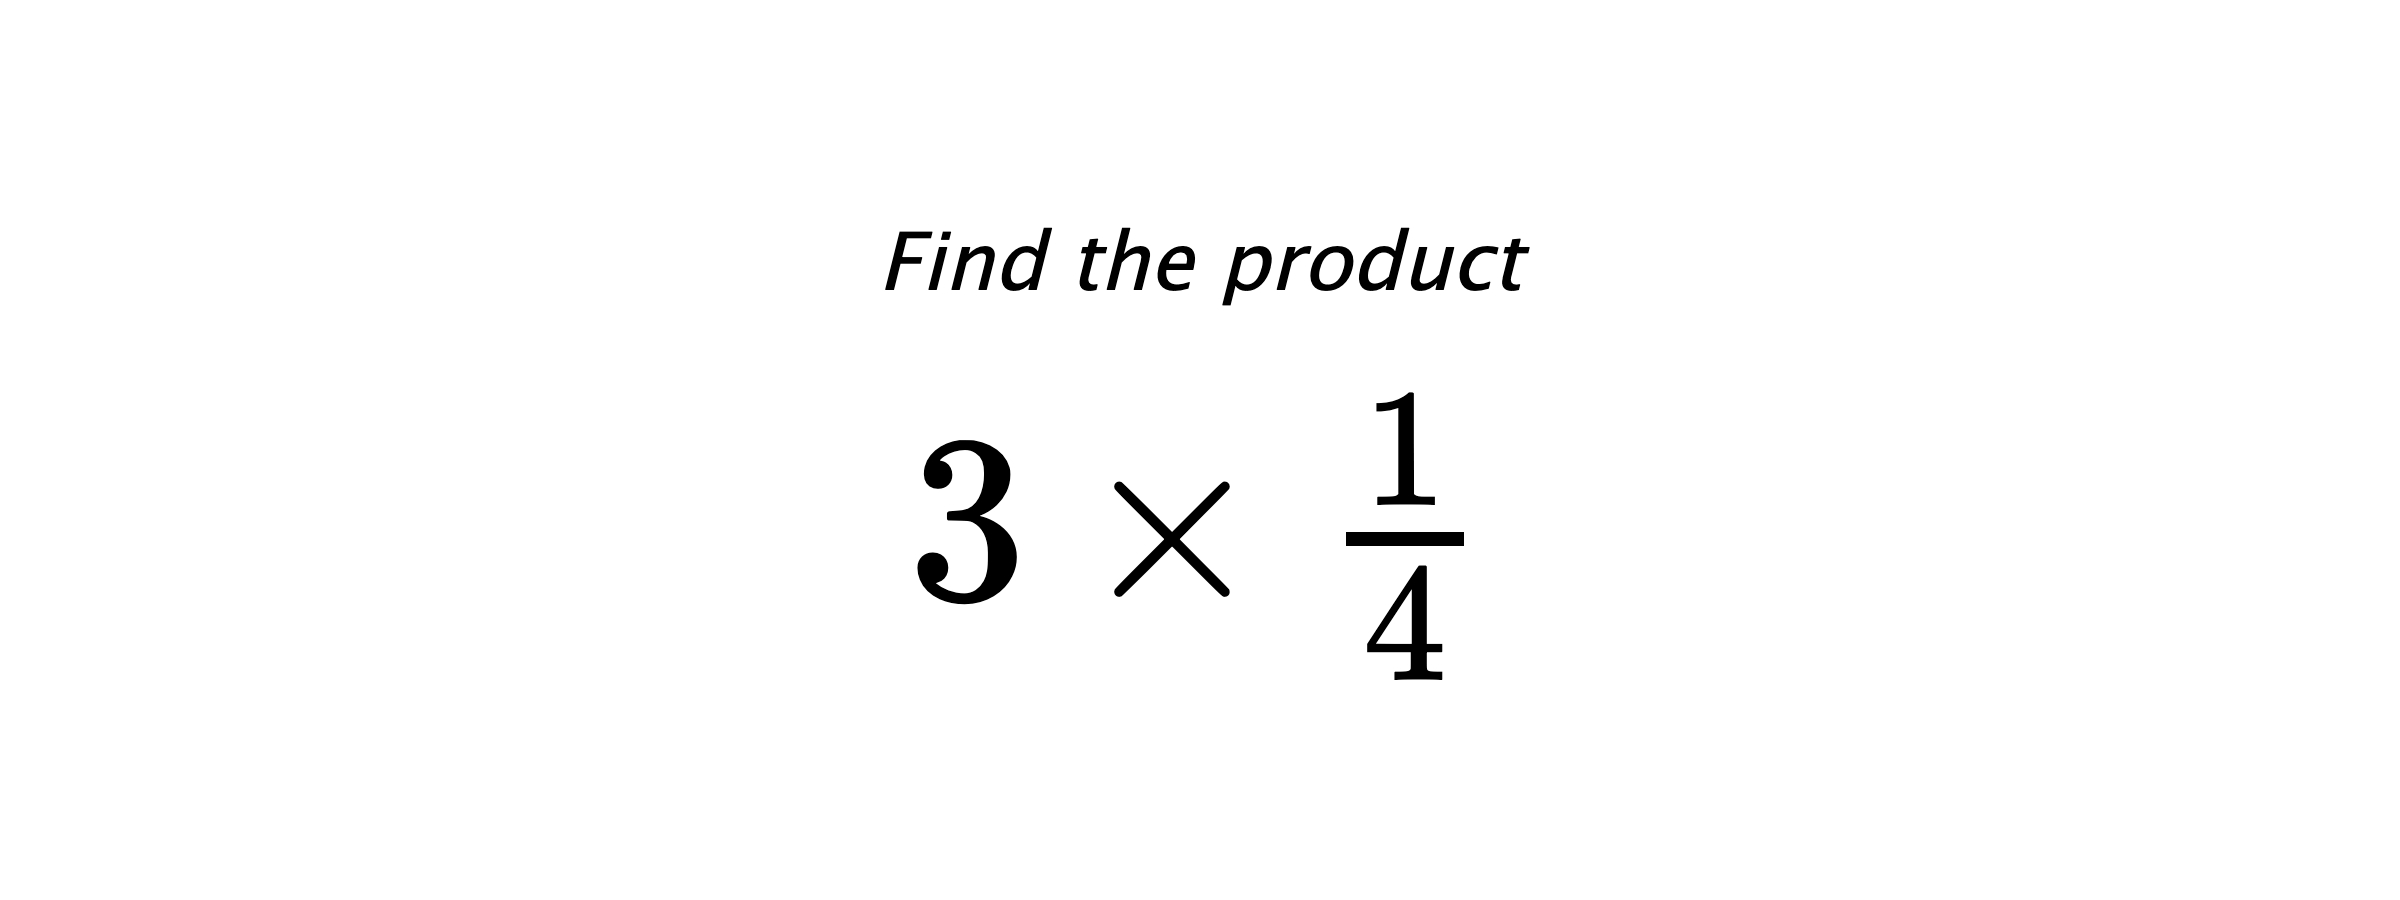 Find the product $ 3 \times \frac{1}{4} $